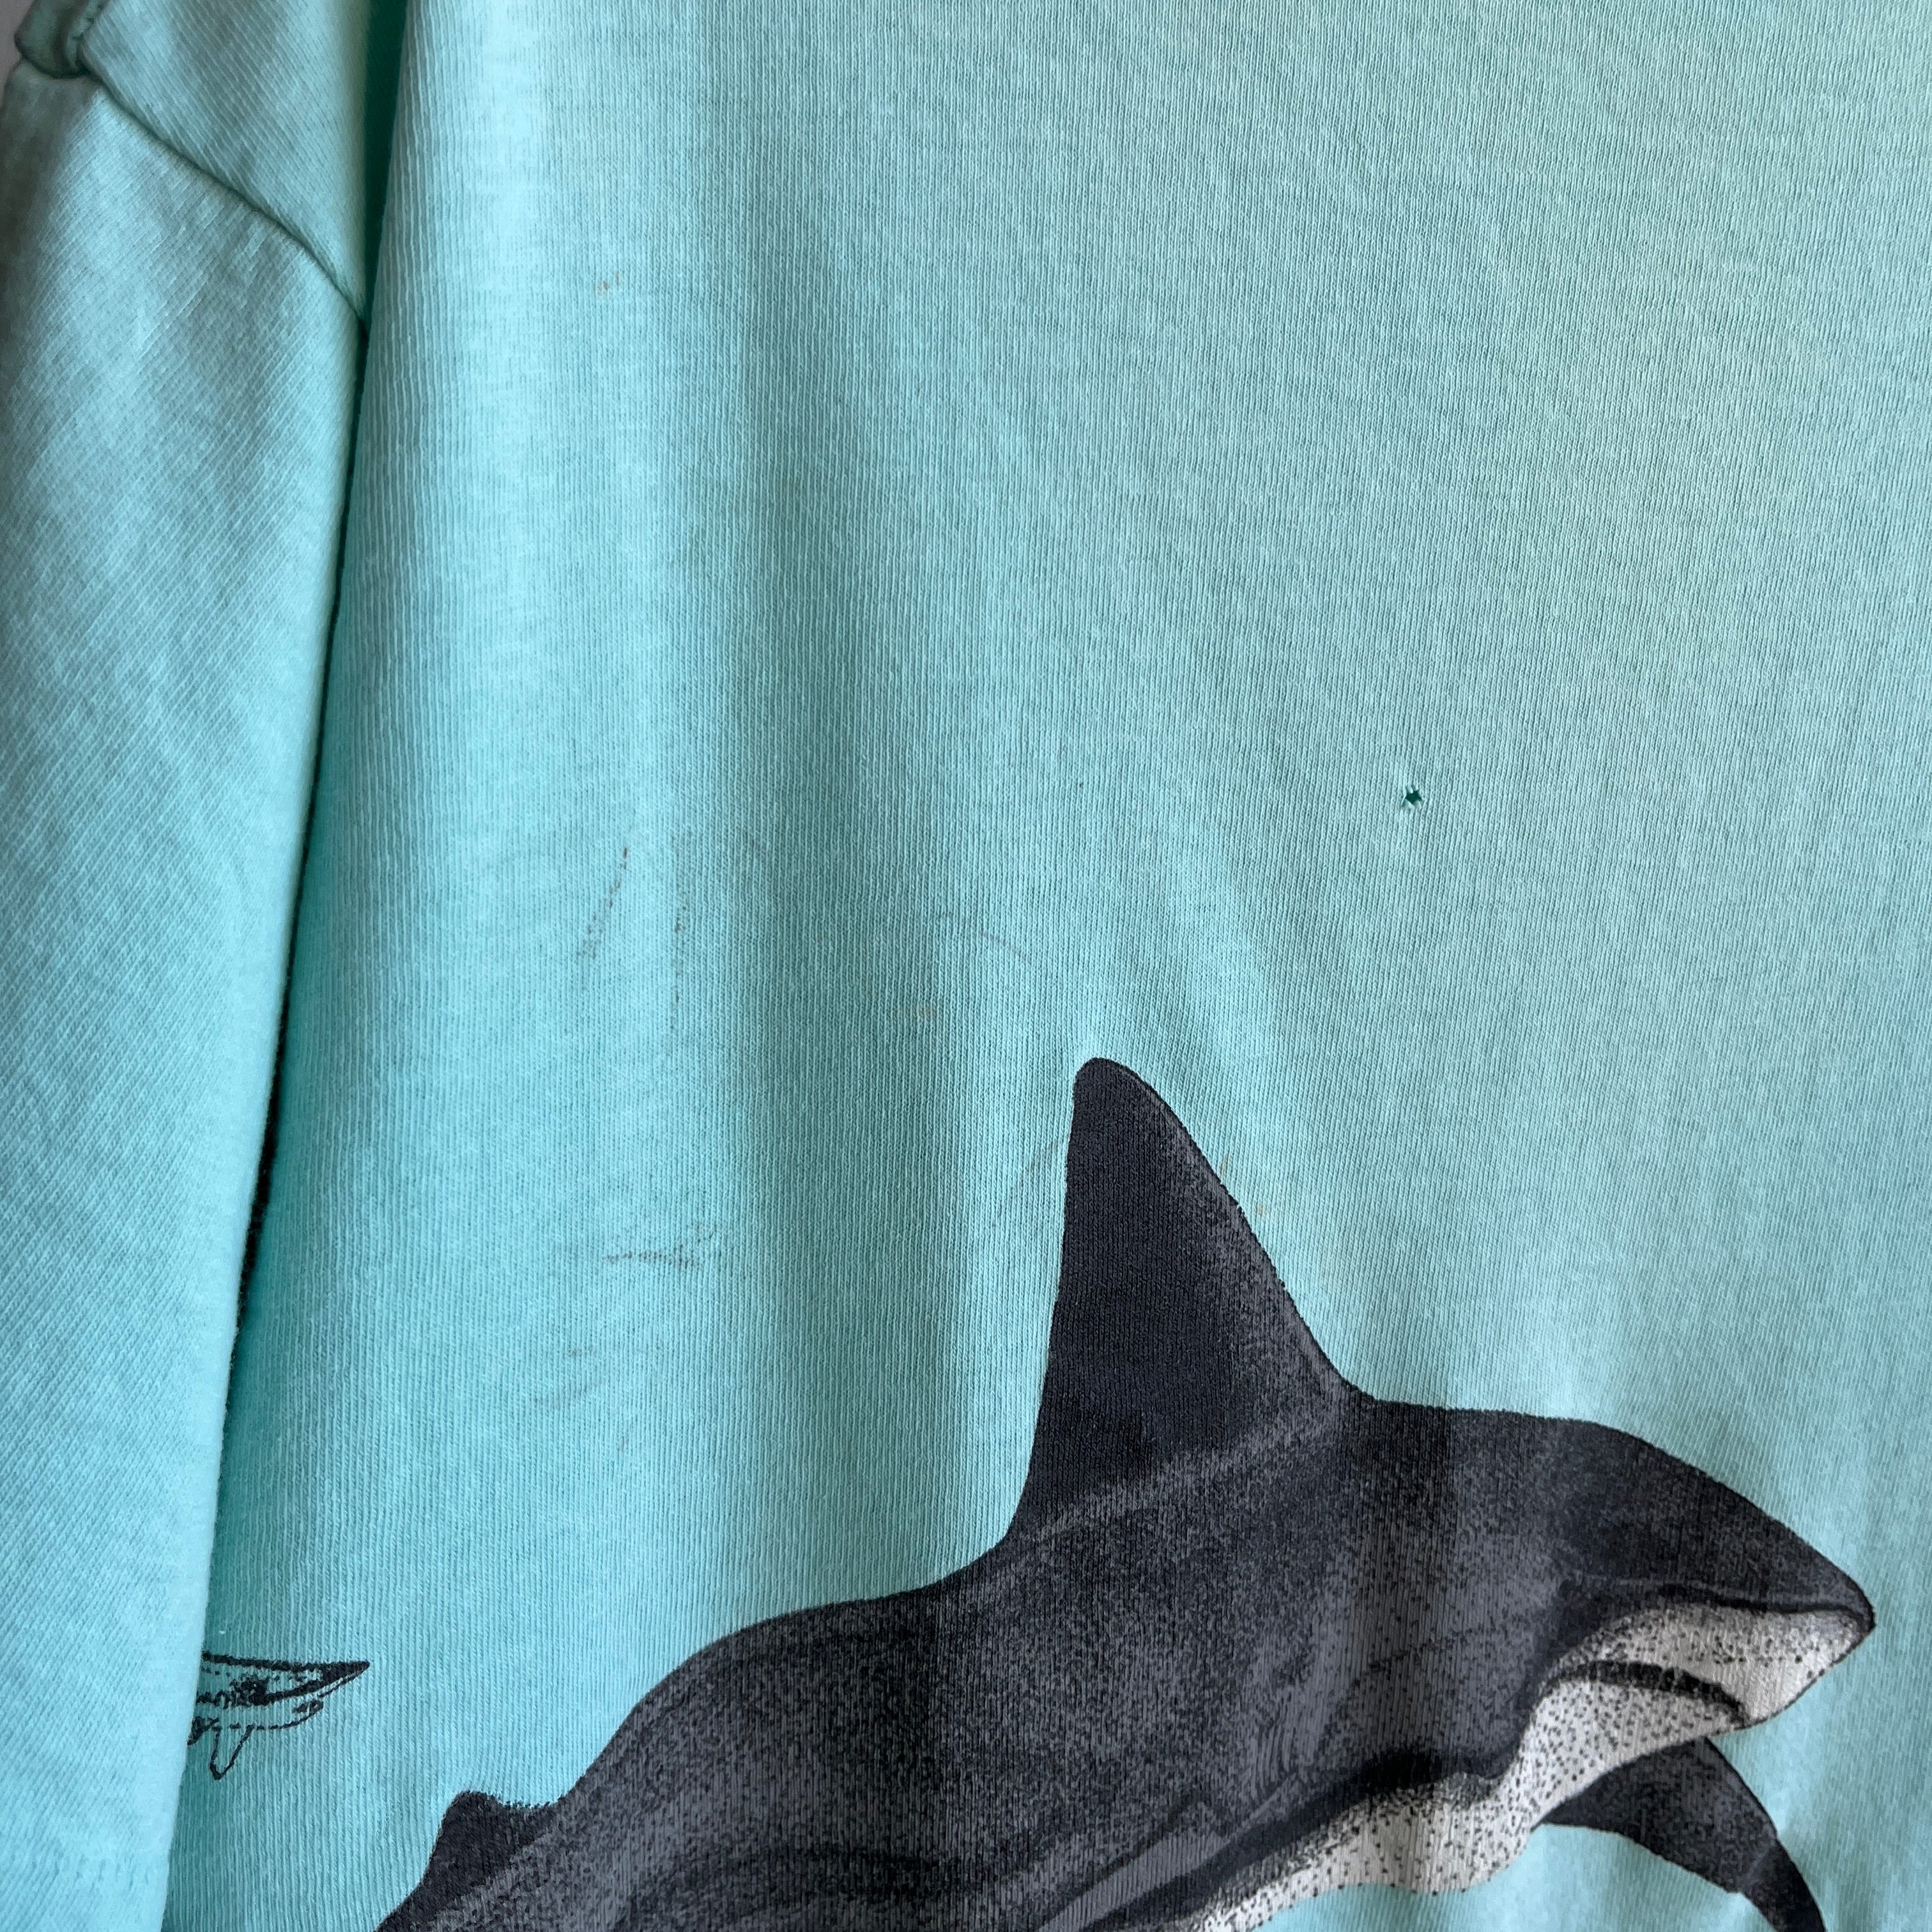 1980s Rad Shark Wrap Around T-Shirt - Stained in the Best Way